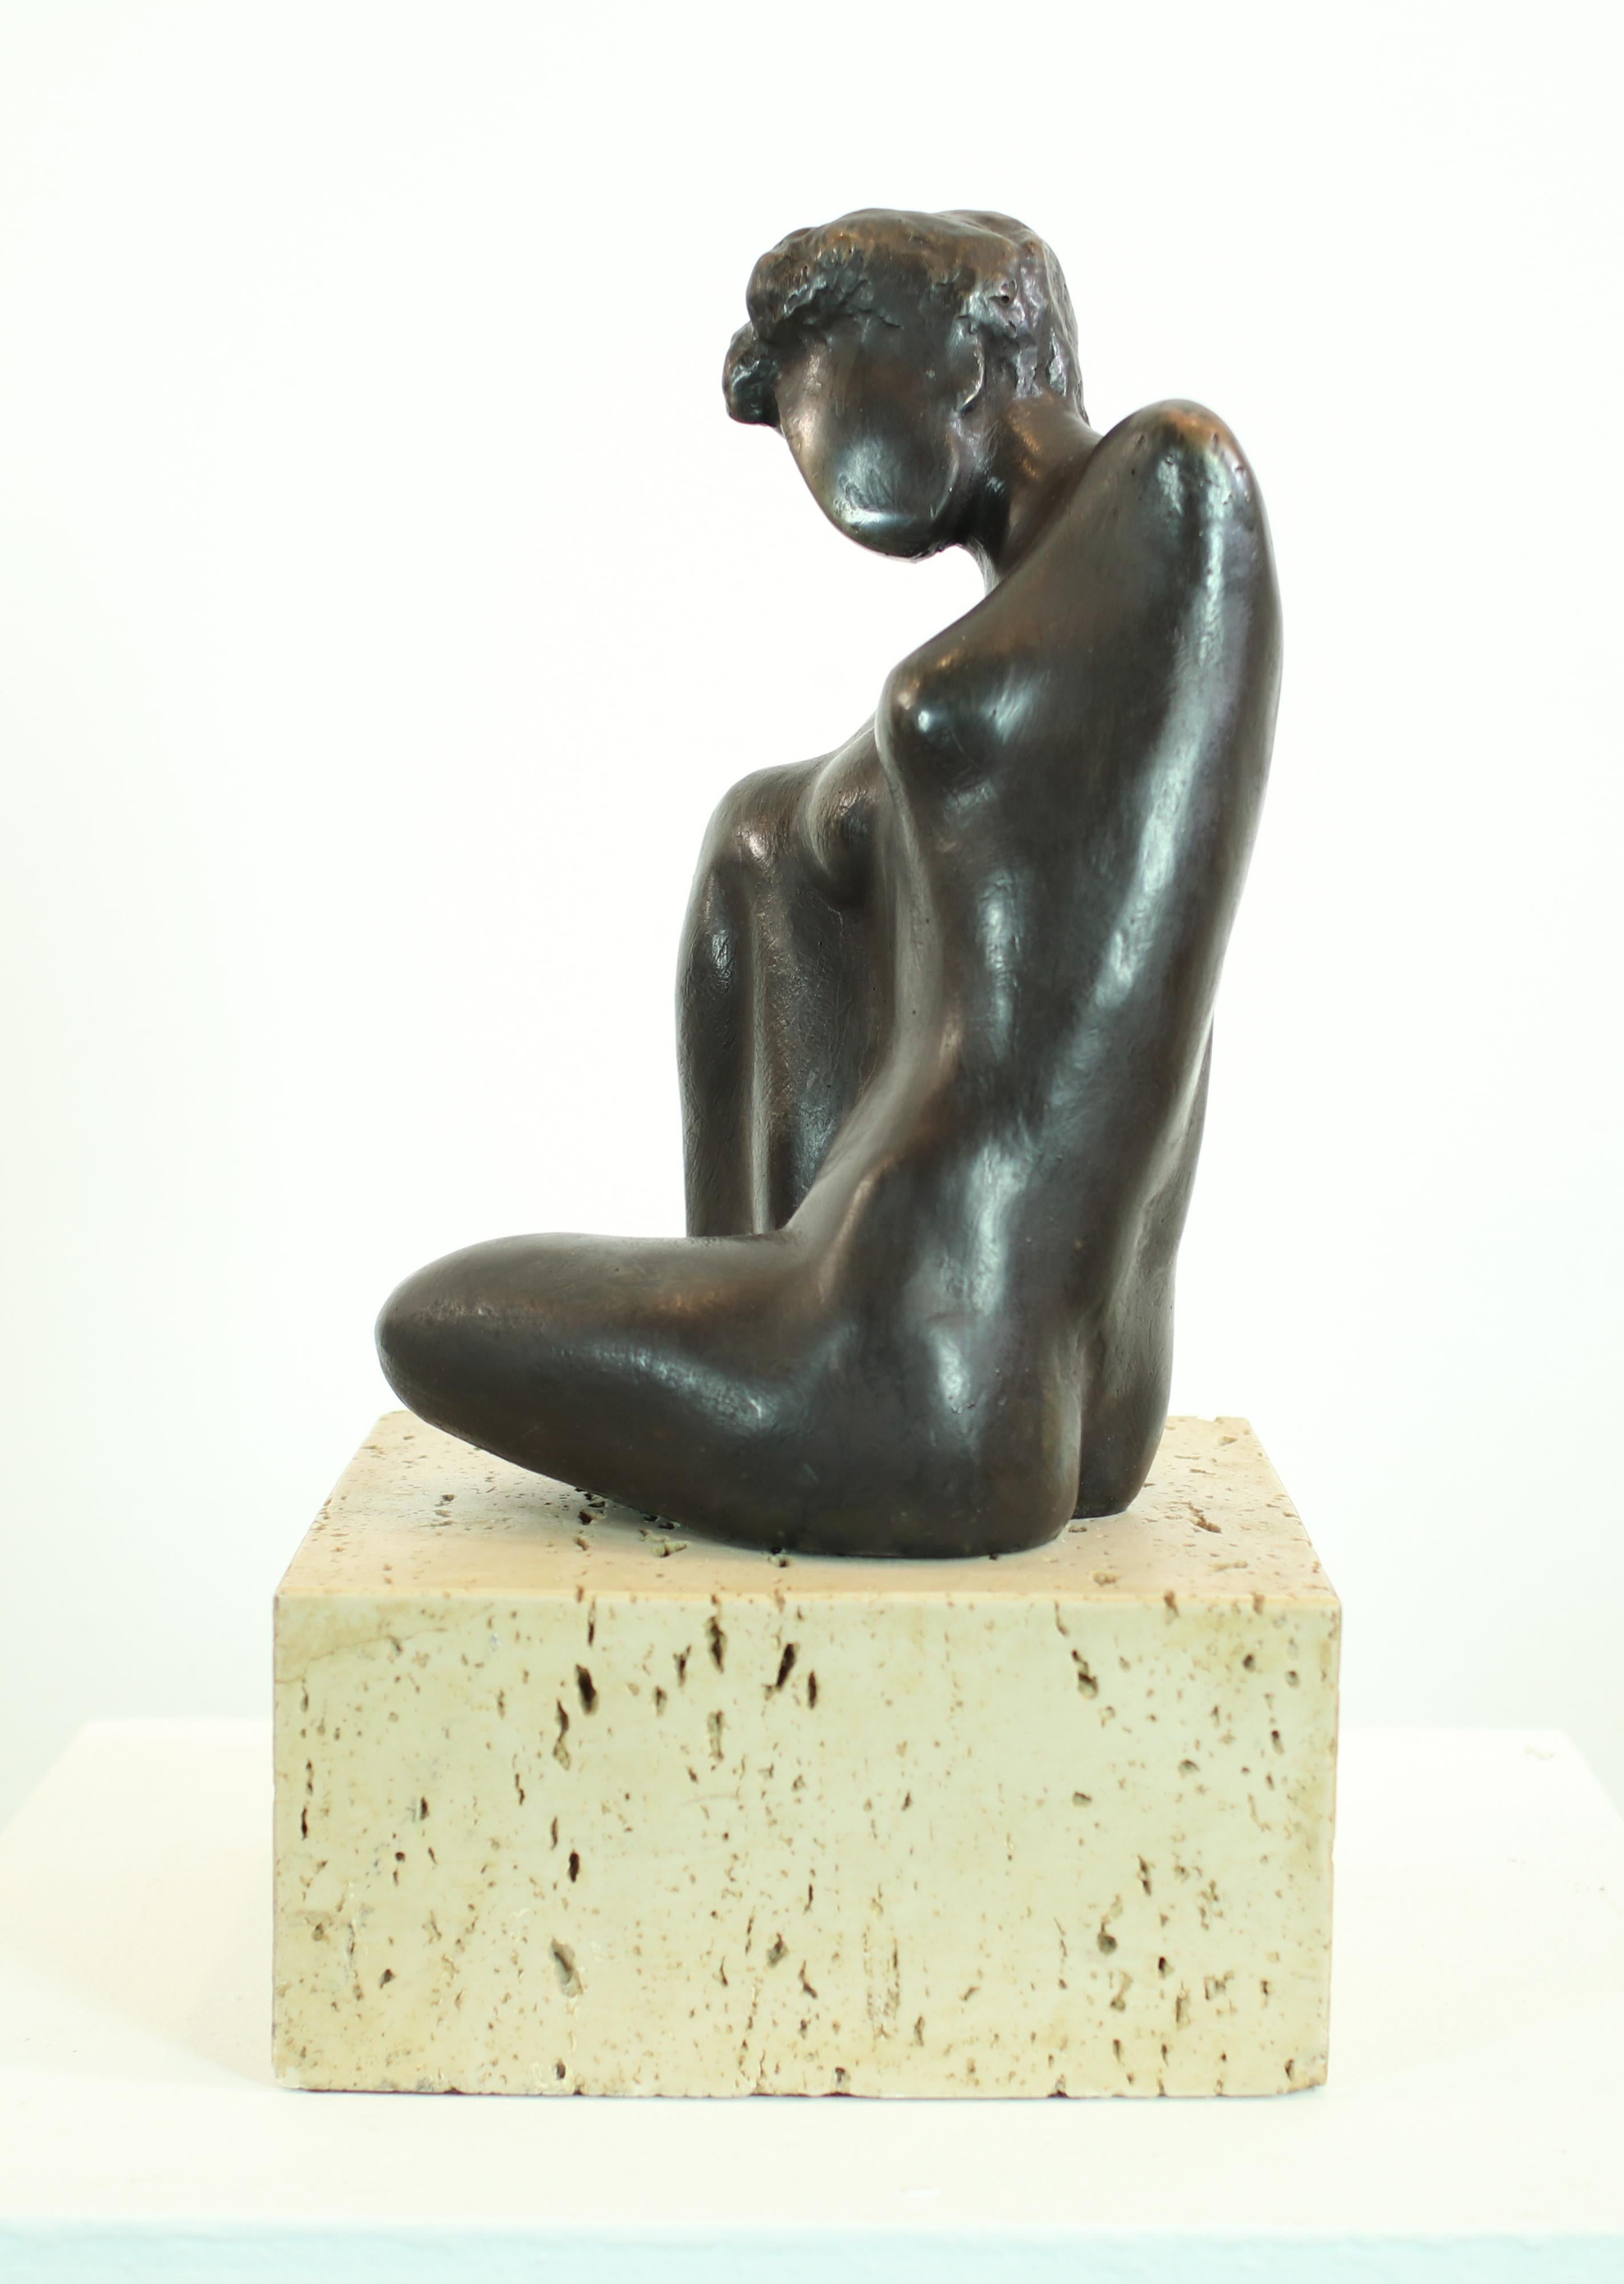 Duquesa de Alba. Bronze. sculpture
measures with base 20x20x38 cm
Lluís Llongueras represents the disagreement that corresponds directly to the personality of the artist, always versatile, groundbreaking, temperamental and one hundred percent